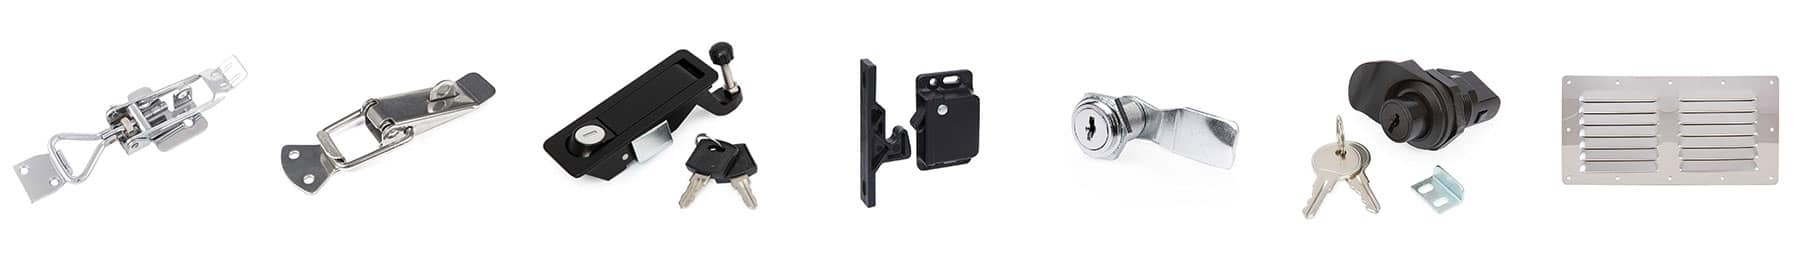 Locks, Toggle Latches, Compression Latches, Camlocks and Vents